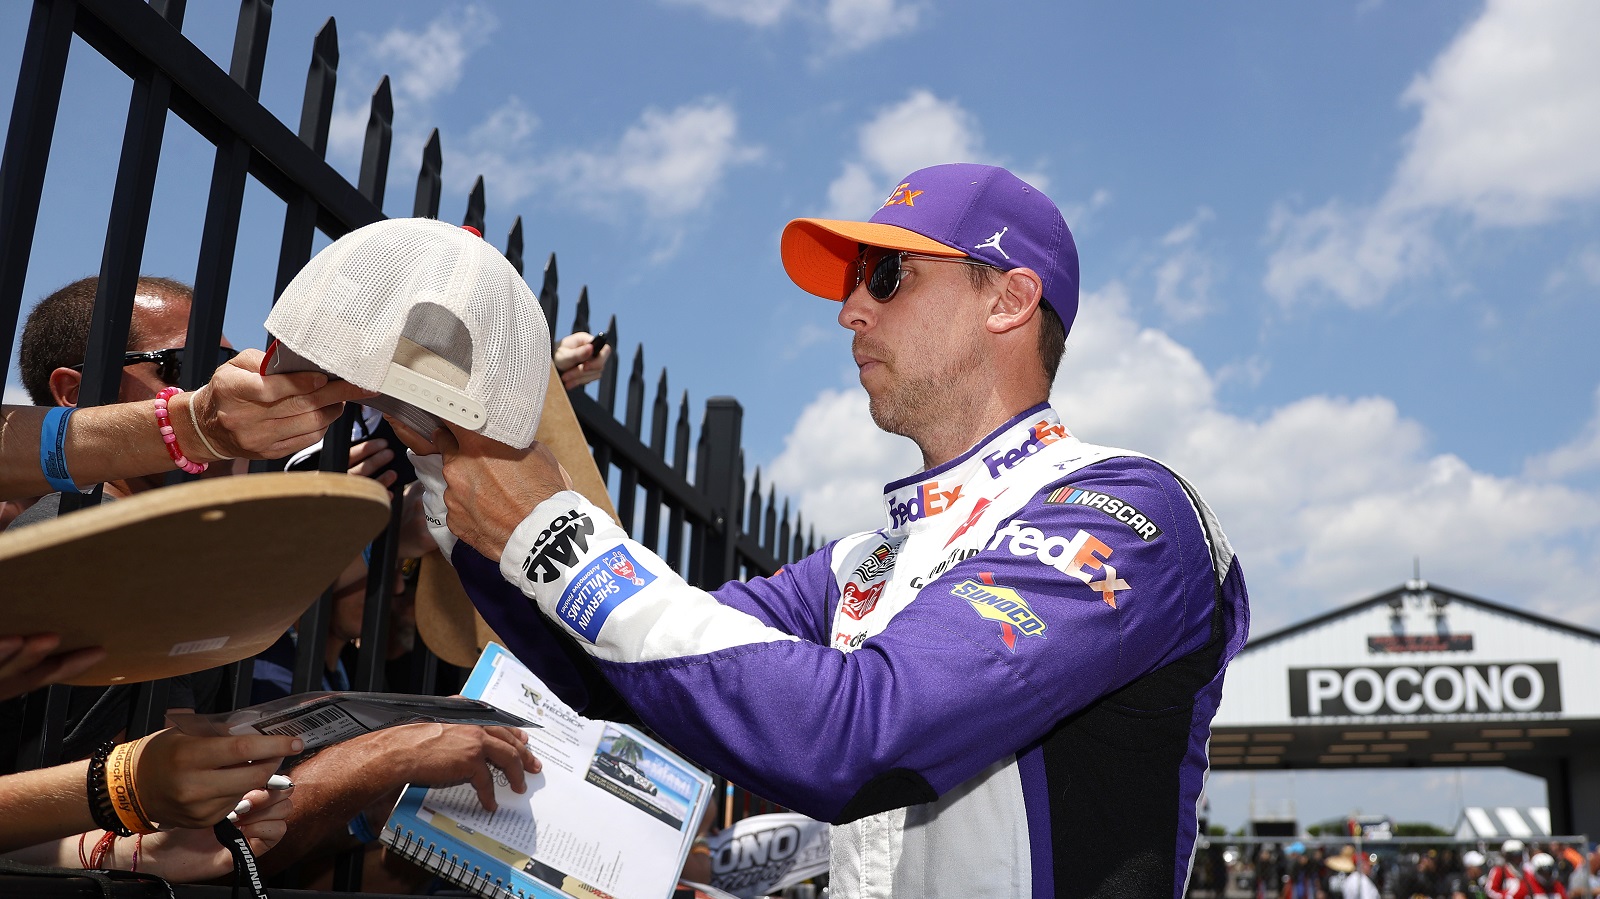 Denny Hamlin signs autographs prior to the NASCAR Cup Series M&M's Fan Appreciation 400 at Pocono Raceway on July 24, 2022. | Tim Nwachukwu/Getty Images